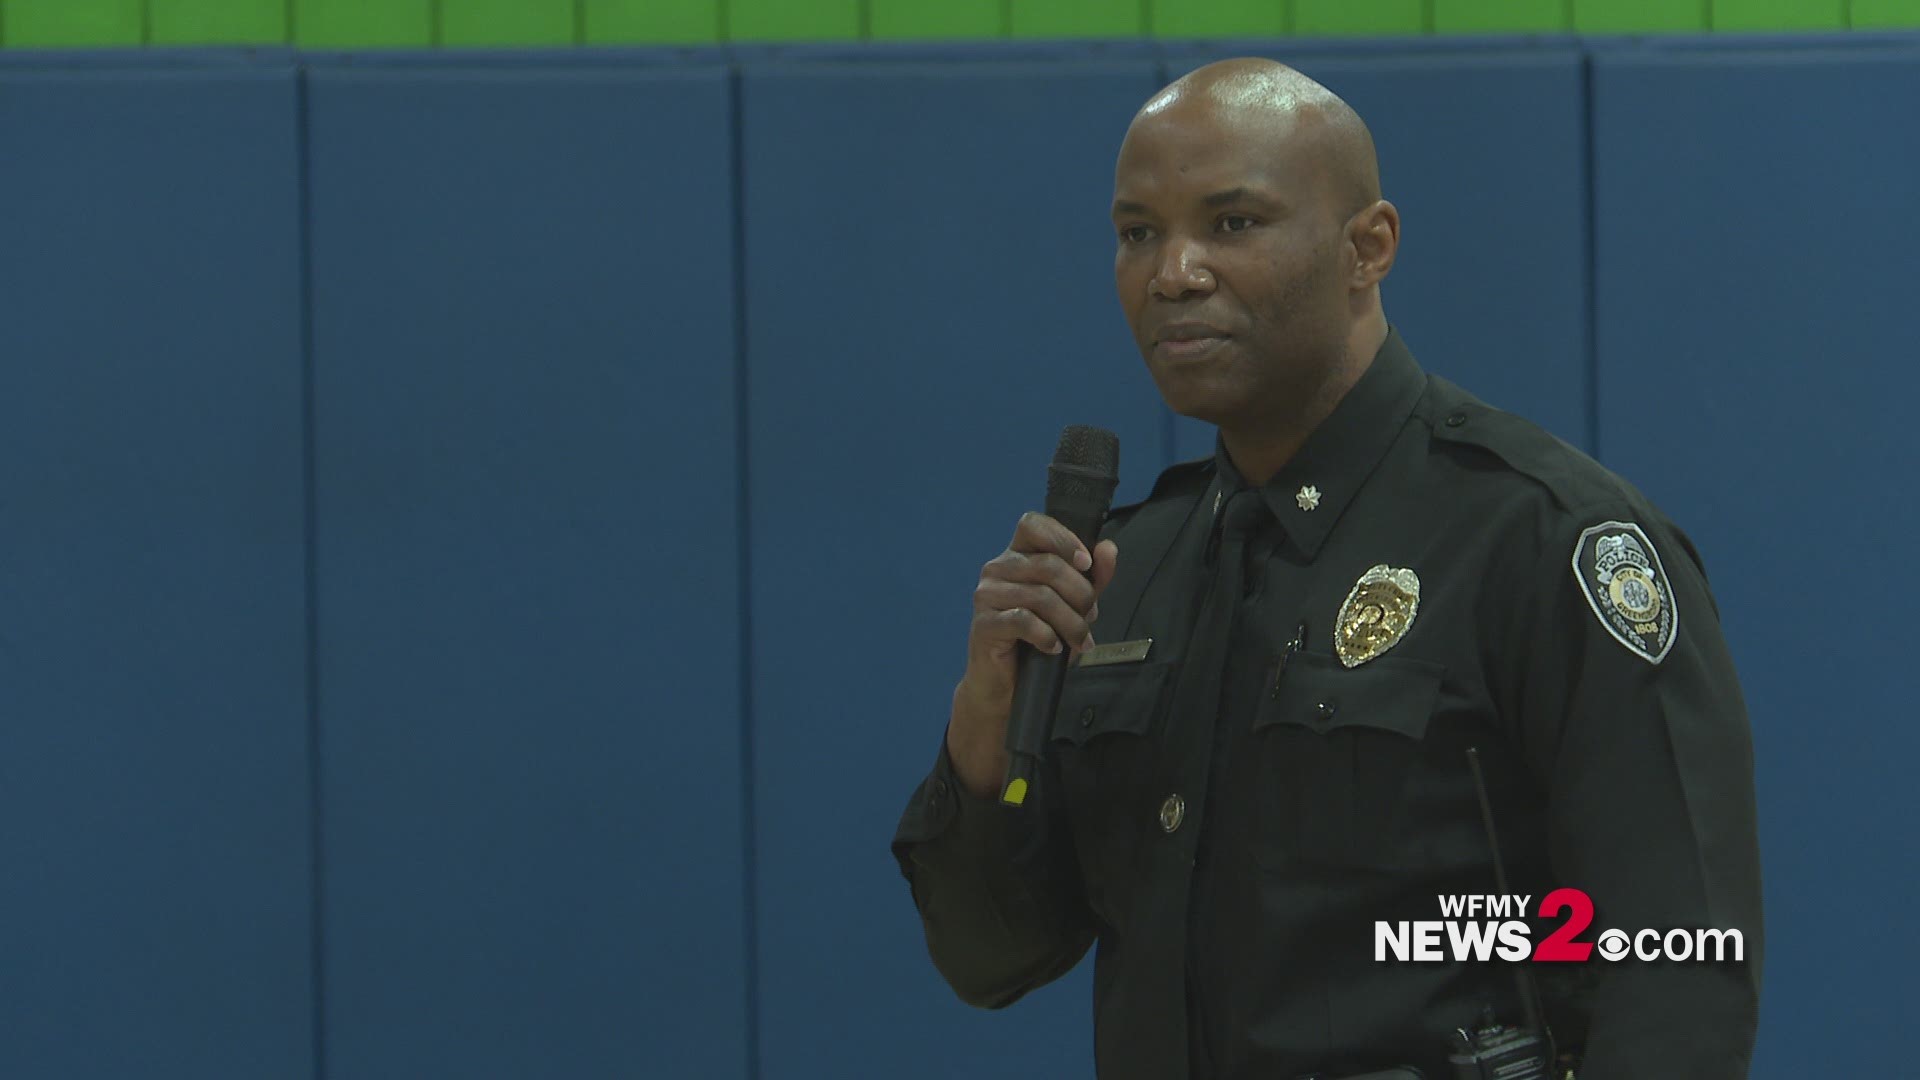 We asked. You answered. Here's what people told us they want Greensboro's new police chief Brian L. James to focus on when he assumes his duties on February 1.